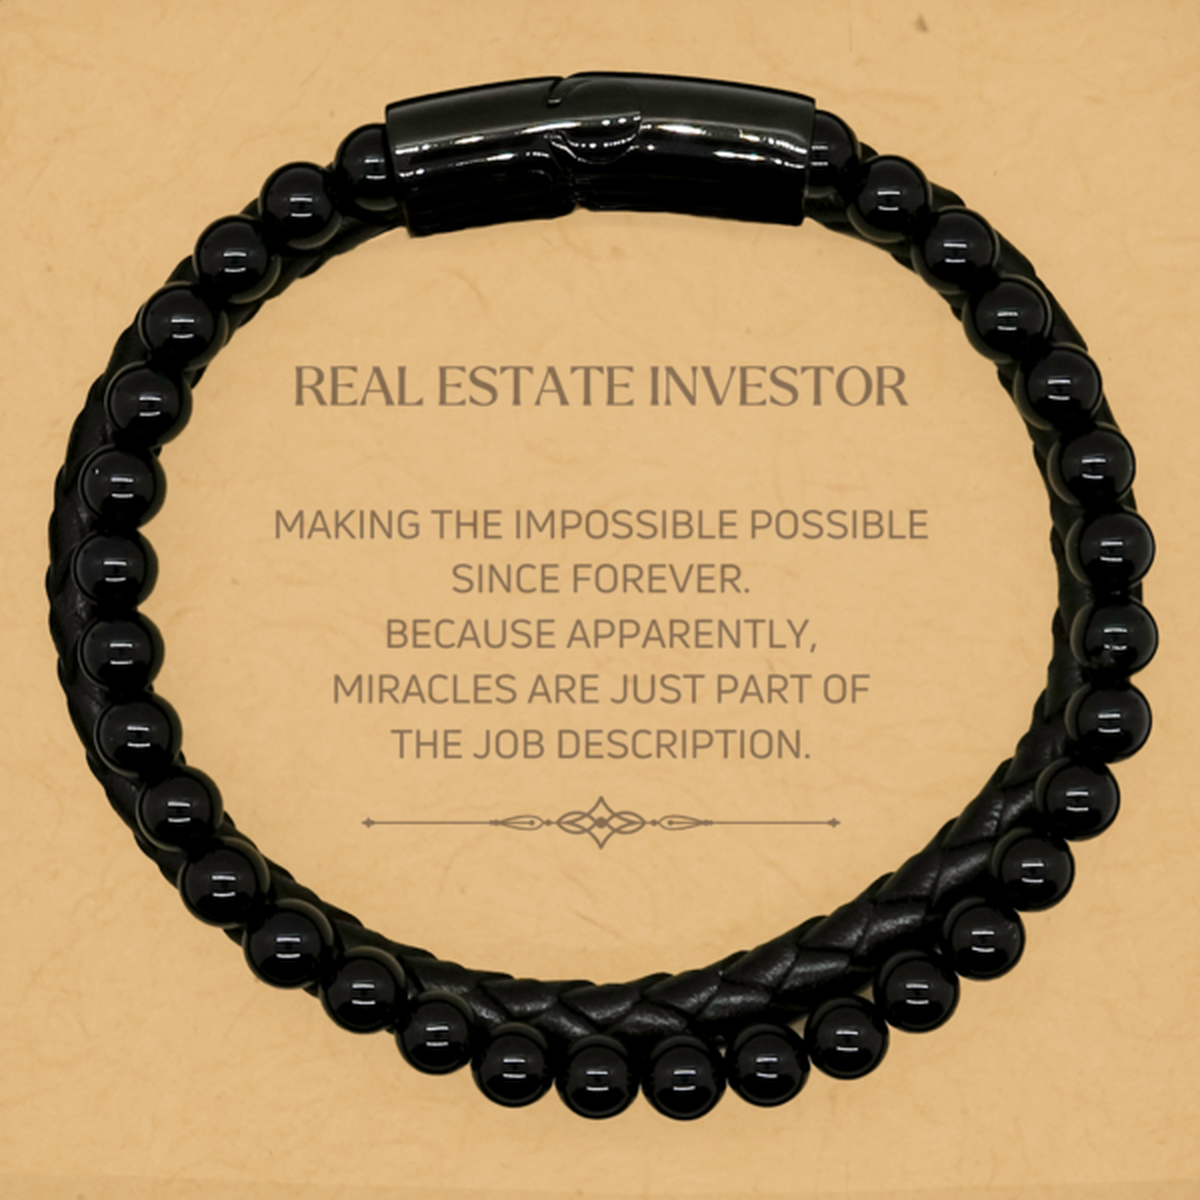 Funny Real Estate Investor Gifts, Miracles are just part of the job description, Inspirational Birthday Stone Leather Bracelets For Real Estate Investor, Men, Women, Coworkers, Friends, Boss